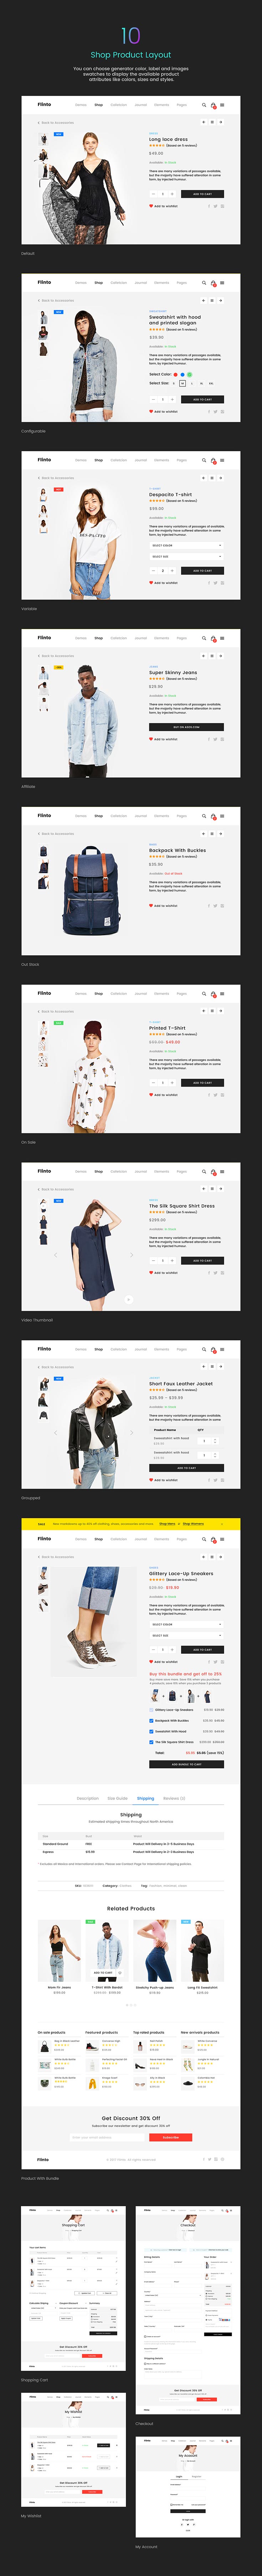 Free Flinto eCommerce PSD Template